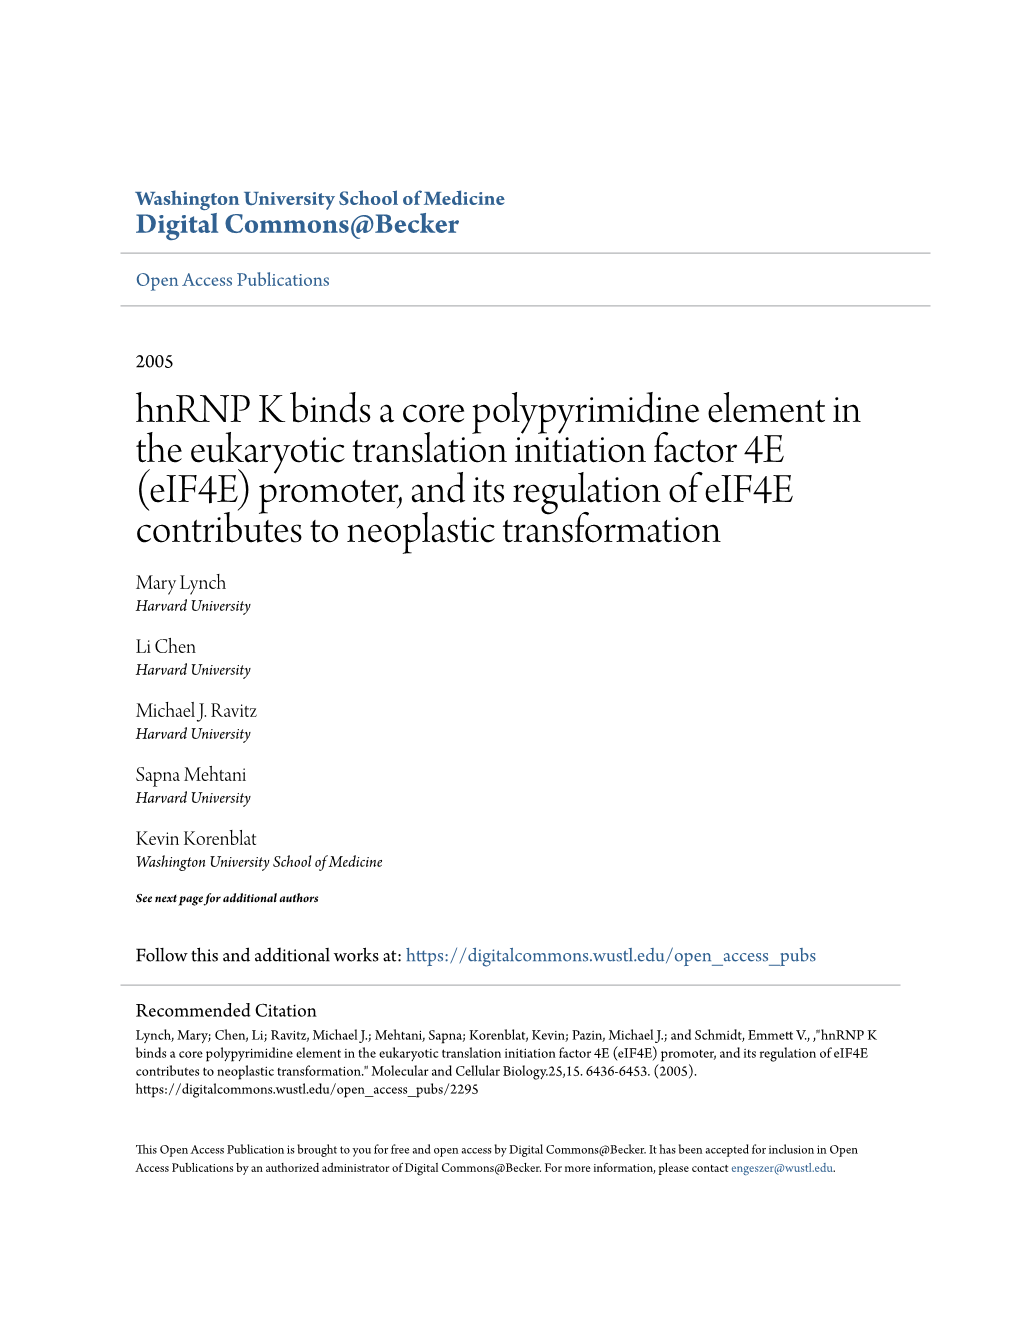 Hnrnp K Binds a Core Polypyrimidine Element in the Eukaryotic Translation Initiation Factor 4E (Eif4e) Promoter, and Its Regulat